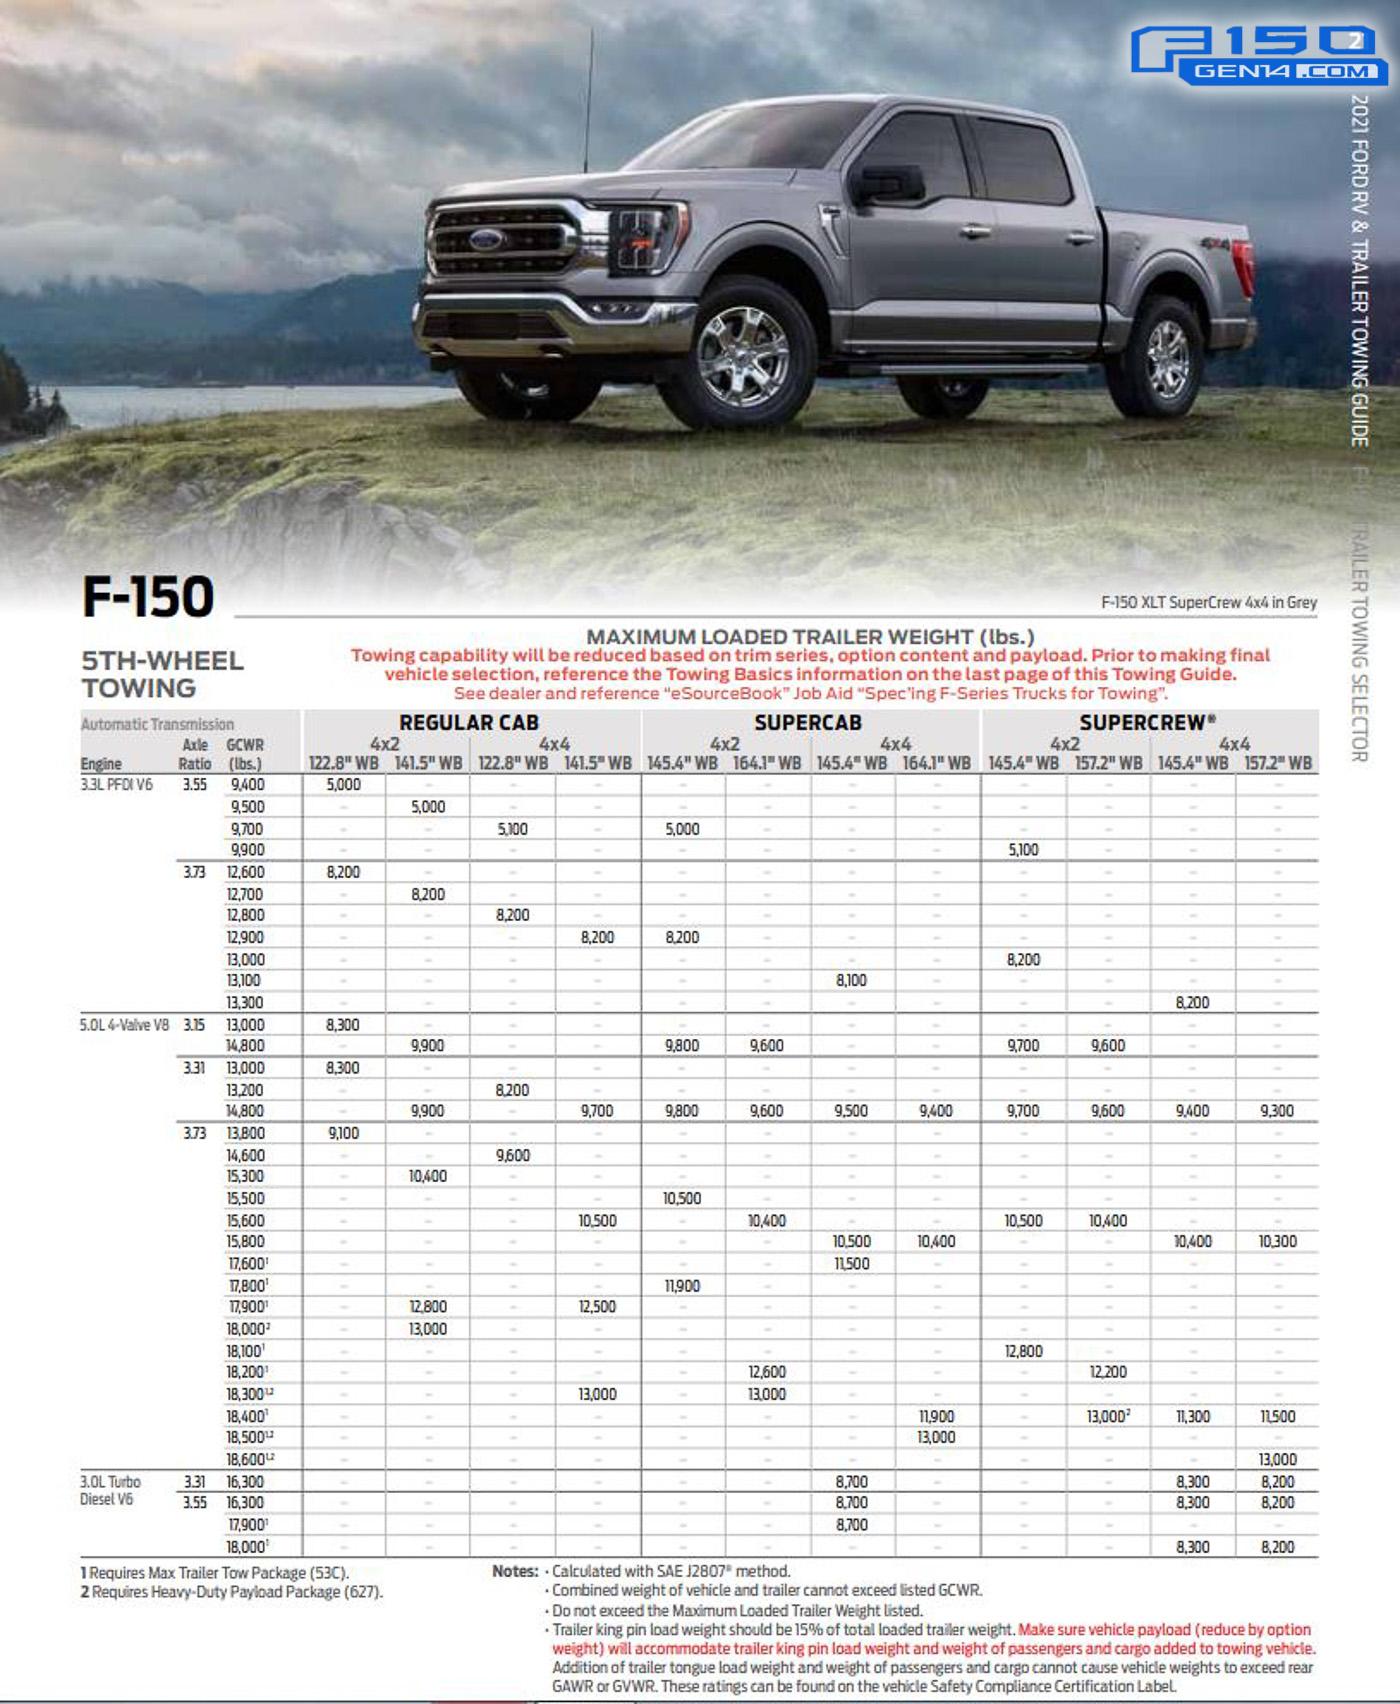 Ford F-150 Lightning 2021 F-150 Towing, 5th Wheel Towing and Cargo / Payload Capacity Figures 2021-F-150-Towing-Payload-Capacity-Guide-08